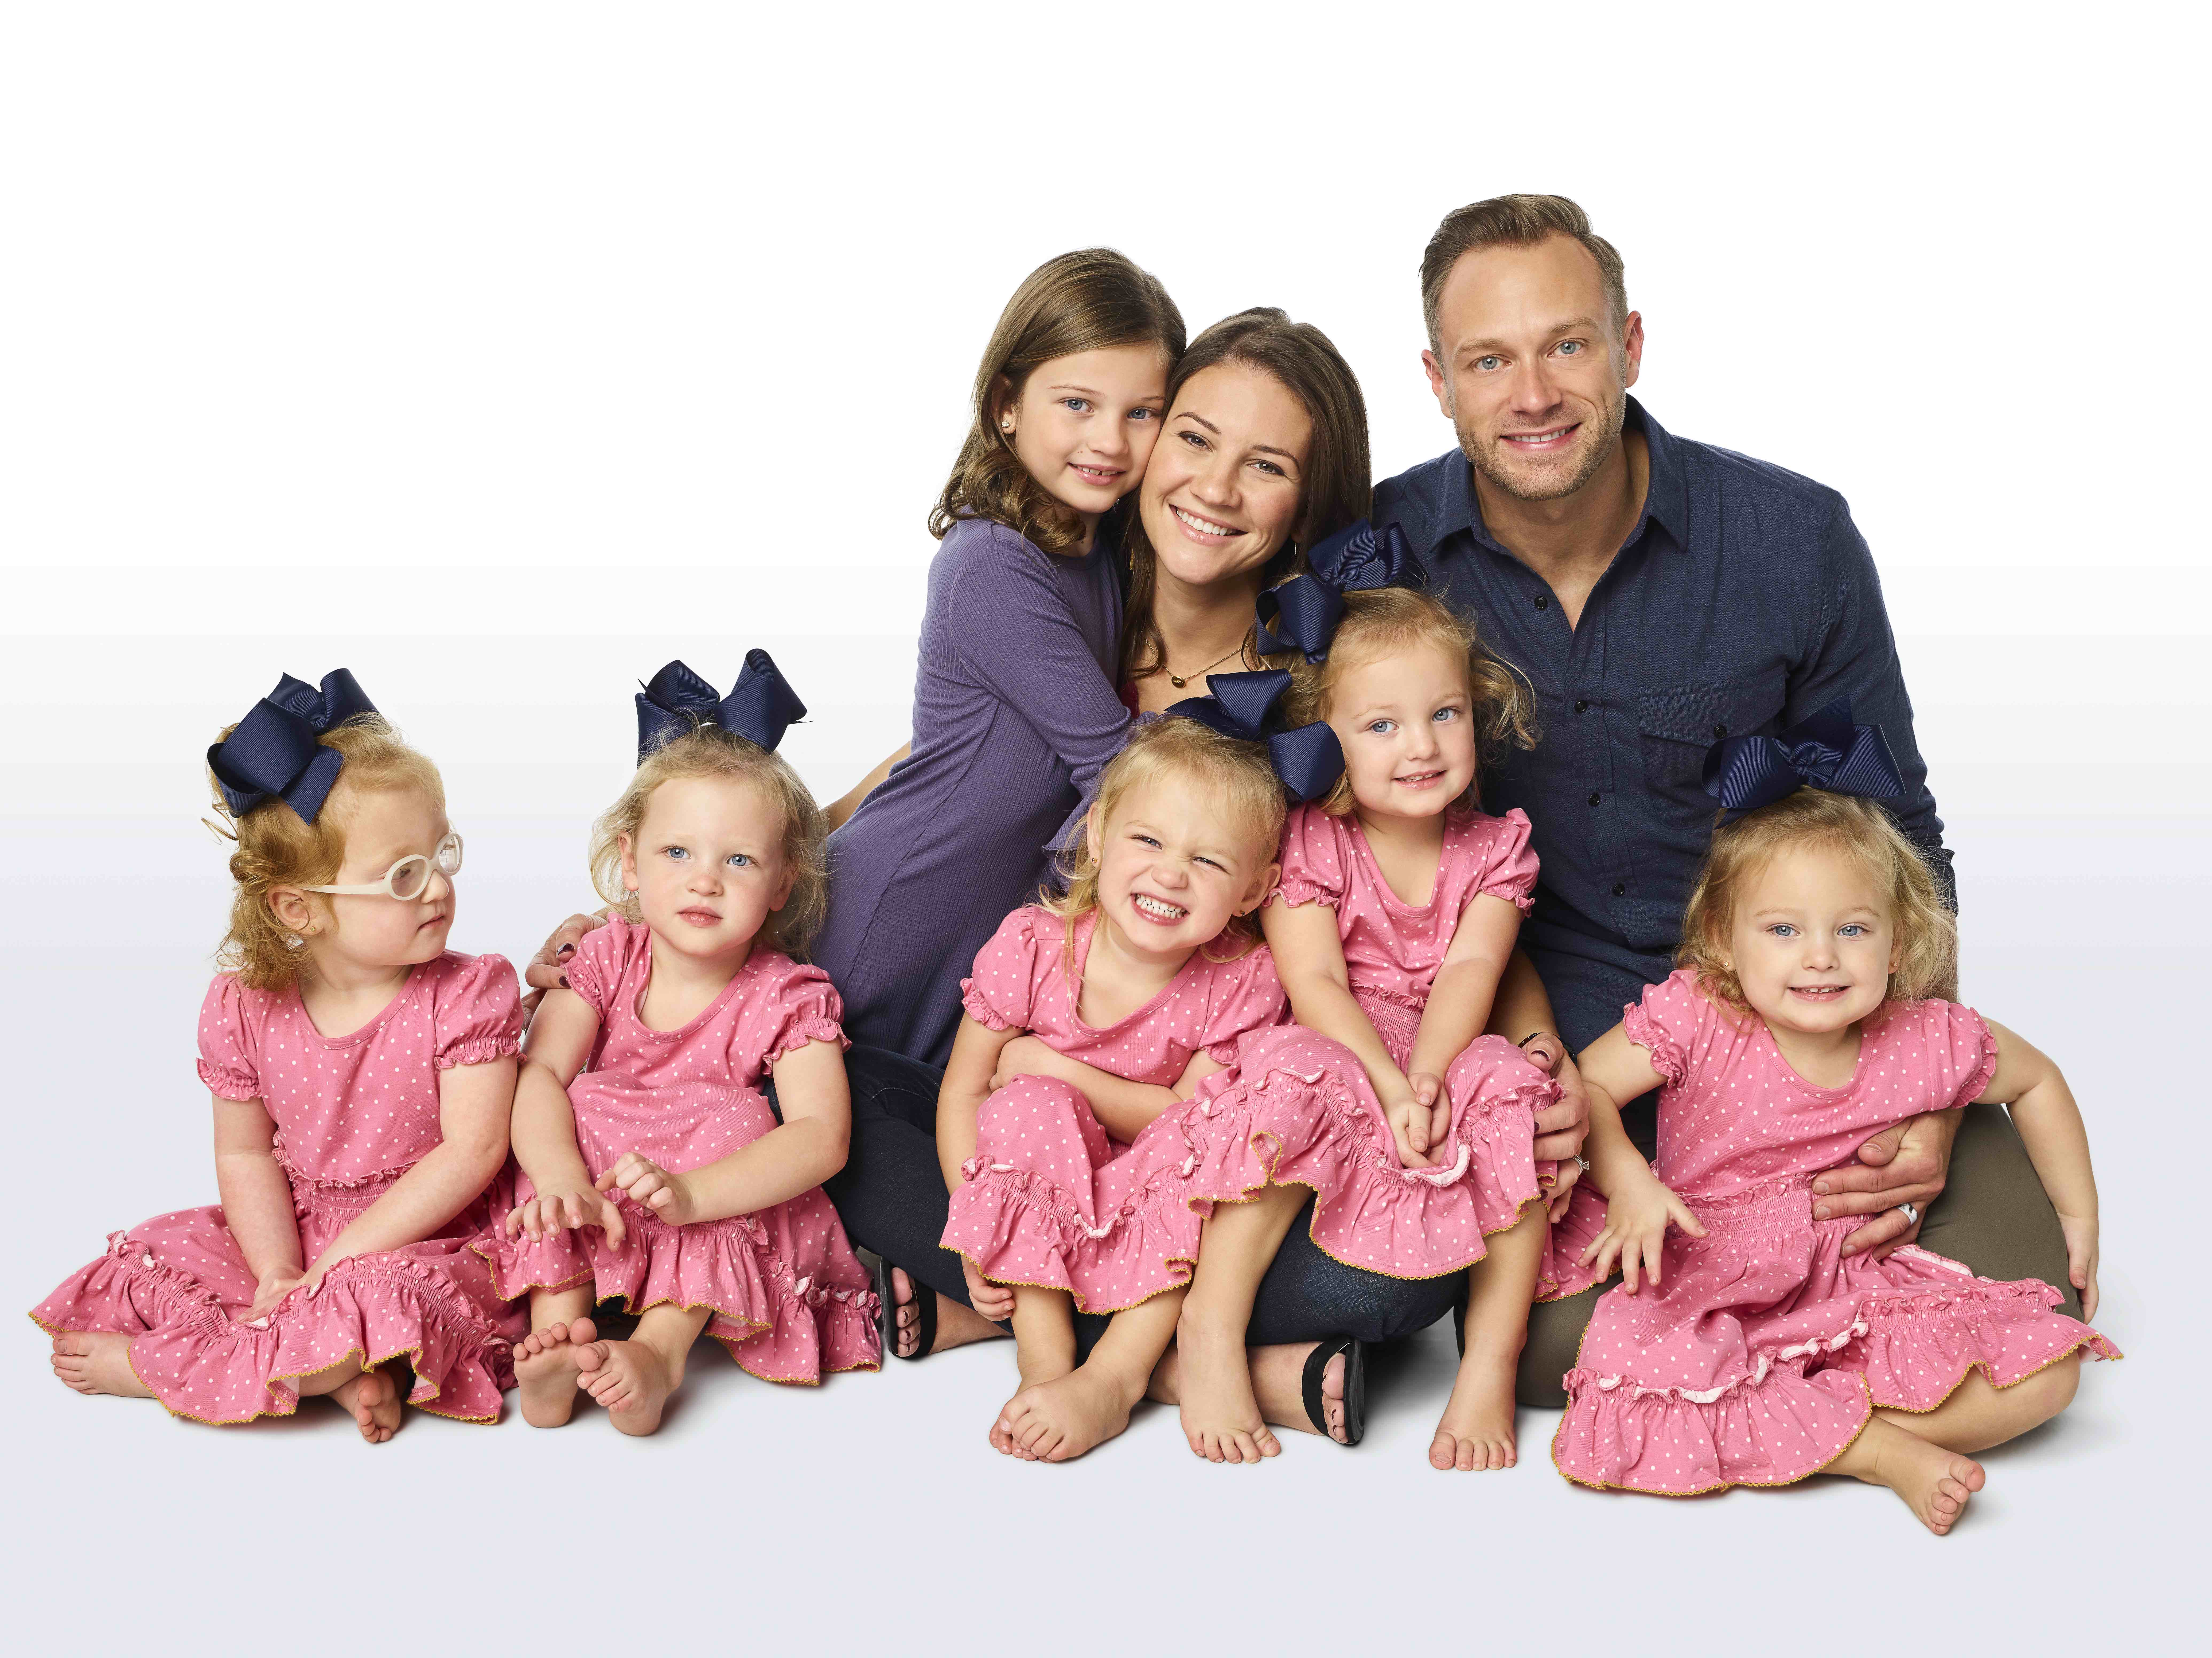 ‘OutDaughtered’ Season Finale: Fans Are Shocked the New Season of the Busby Family’s Reality Show Is Already Over